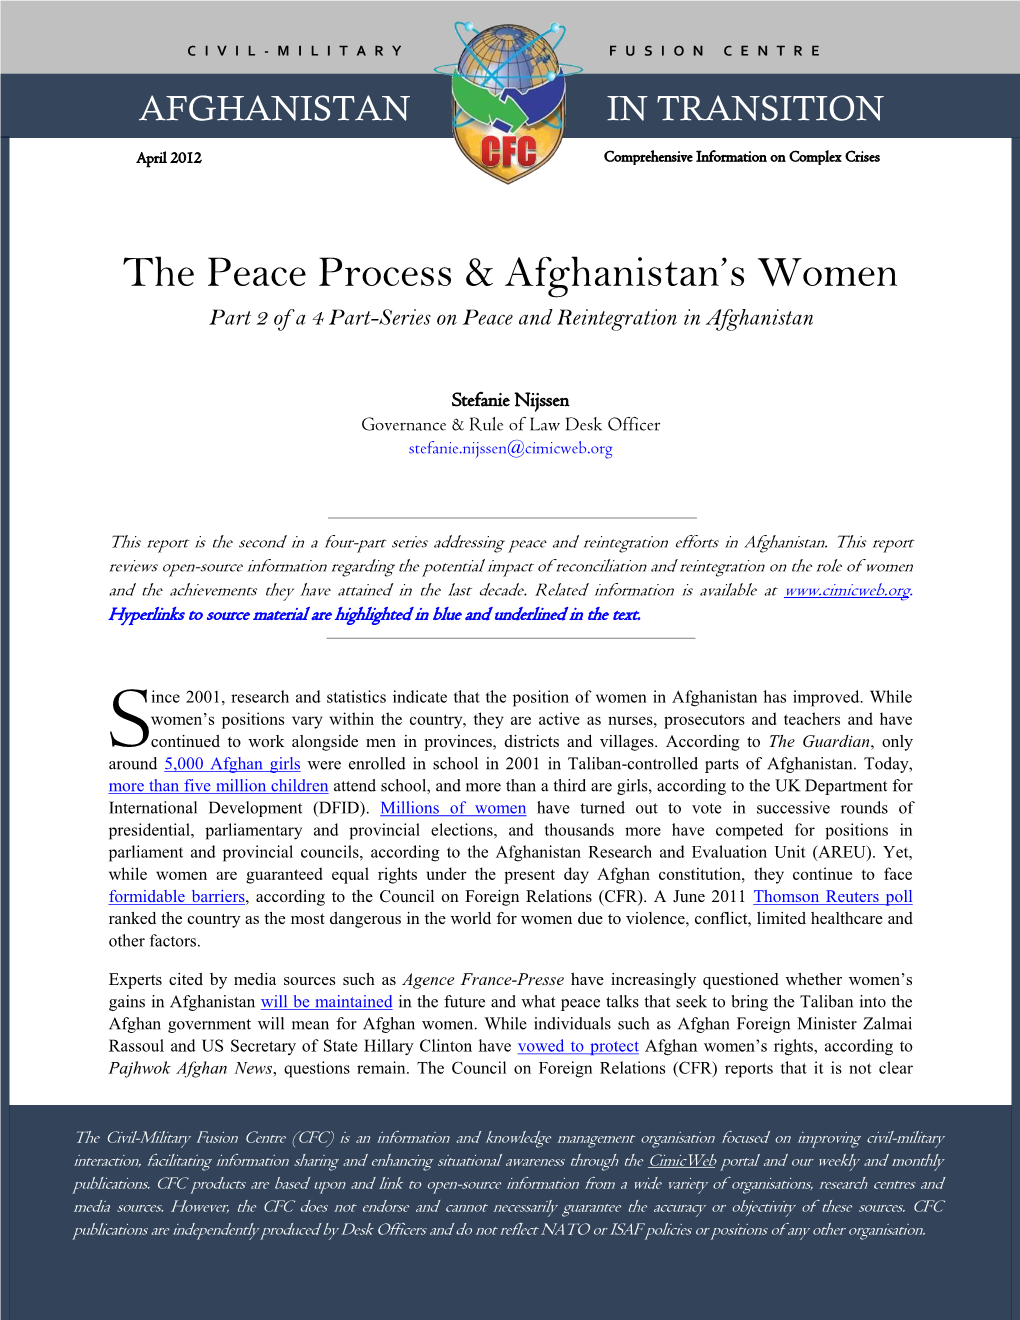 The Peace Process and Afghanistan's Women